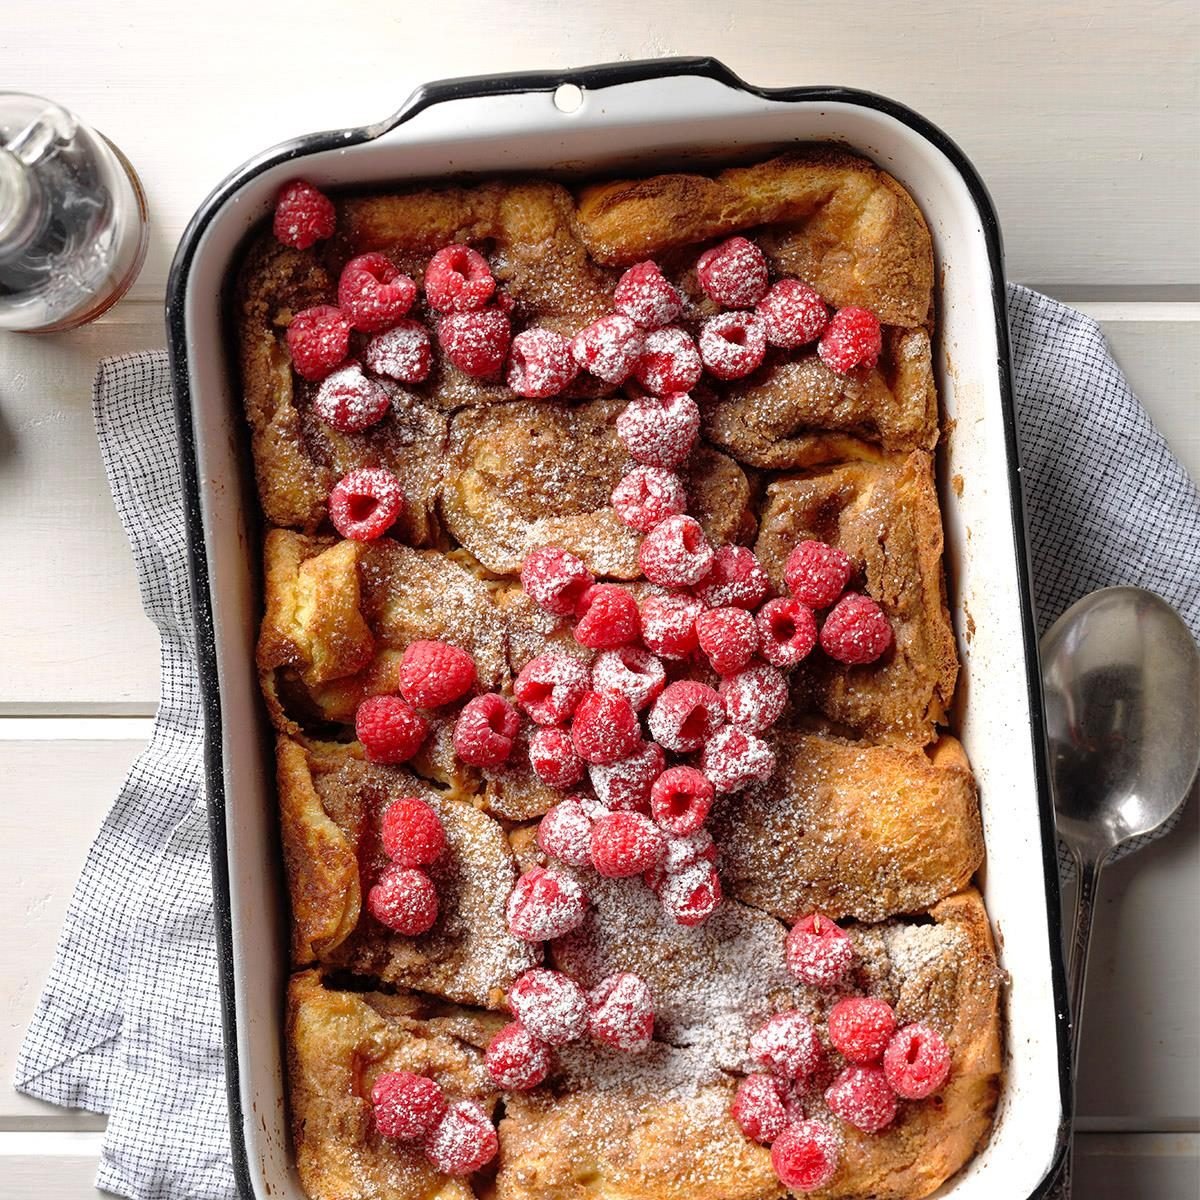 New York: Baked French Toast